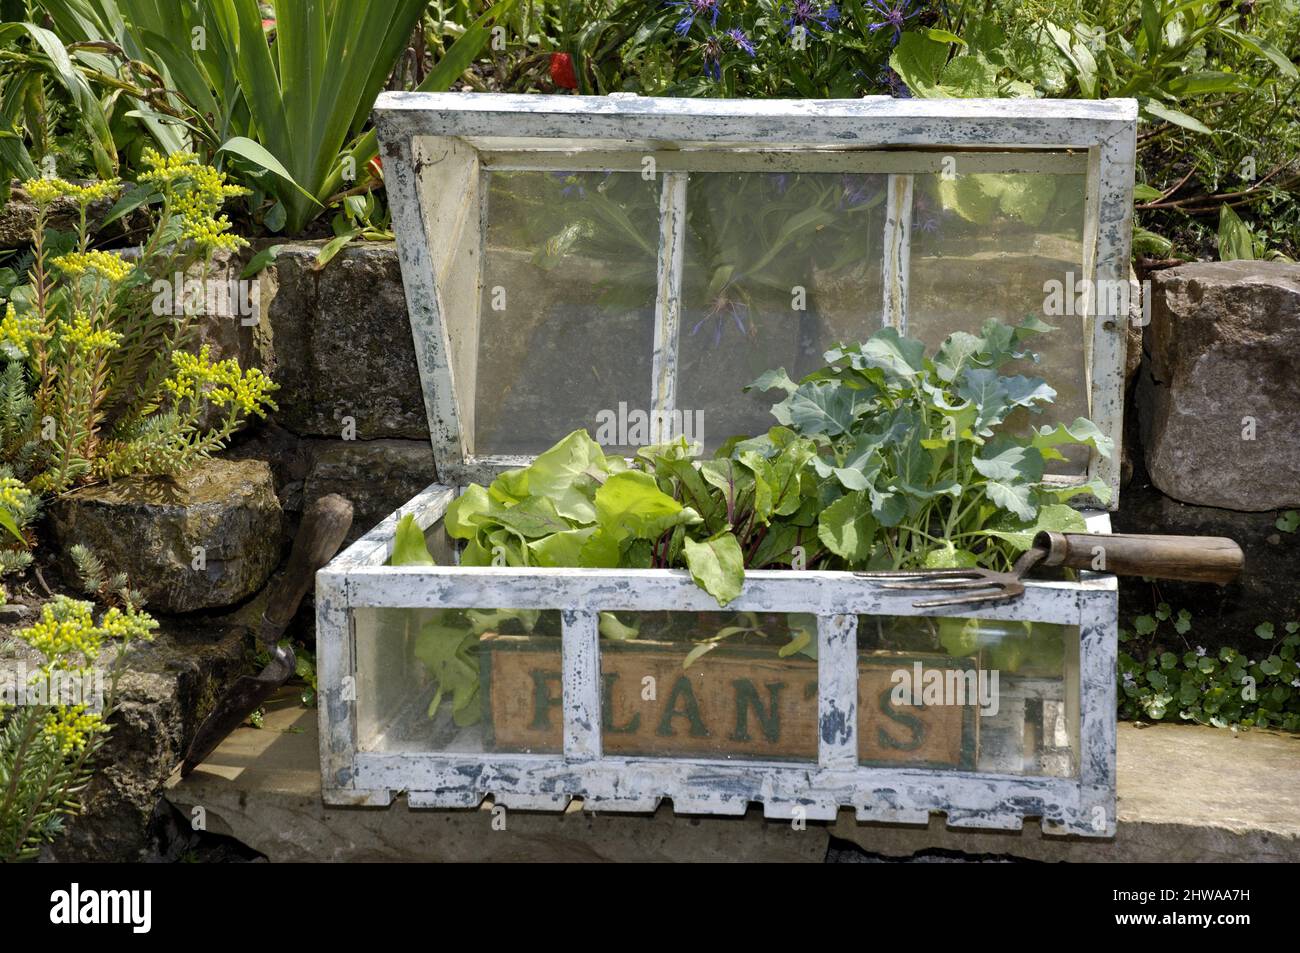 Young vegetable plants in a cold frame, Germany Stock Photo